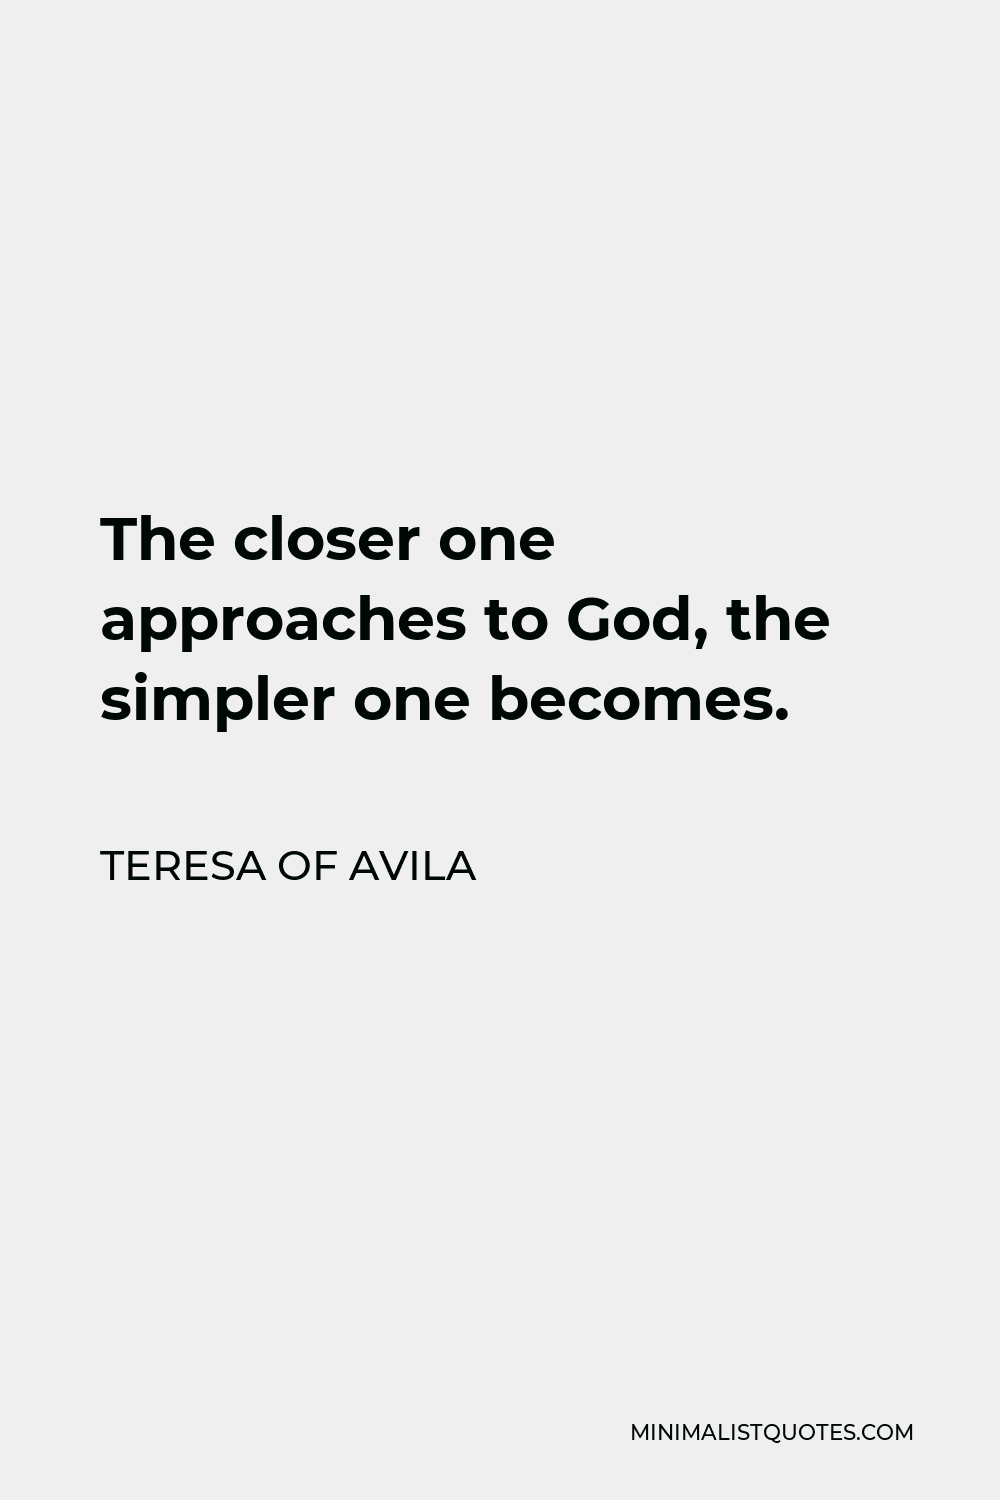 Teresa of Avila Quote - The closer one approaches to God, the simpler one becomes.